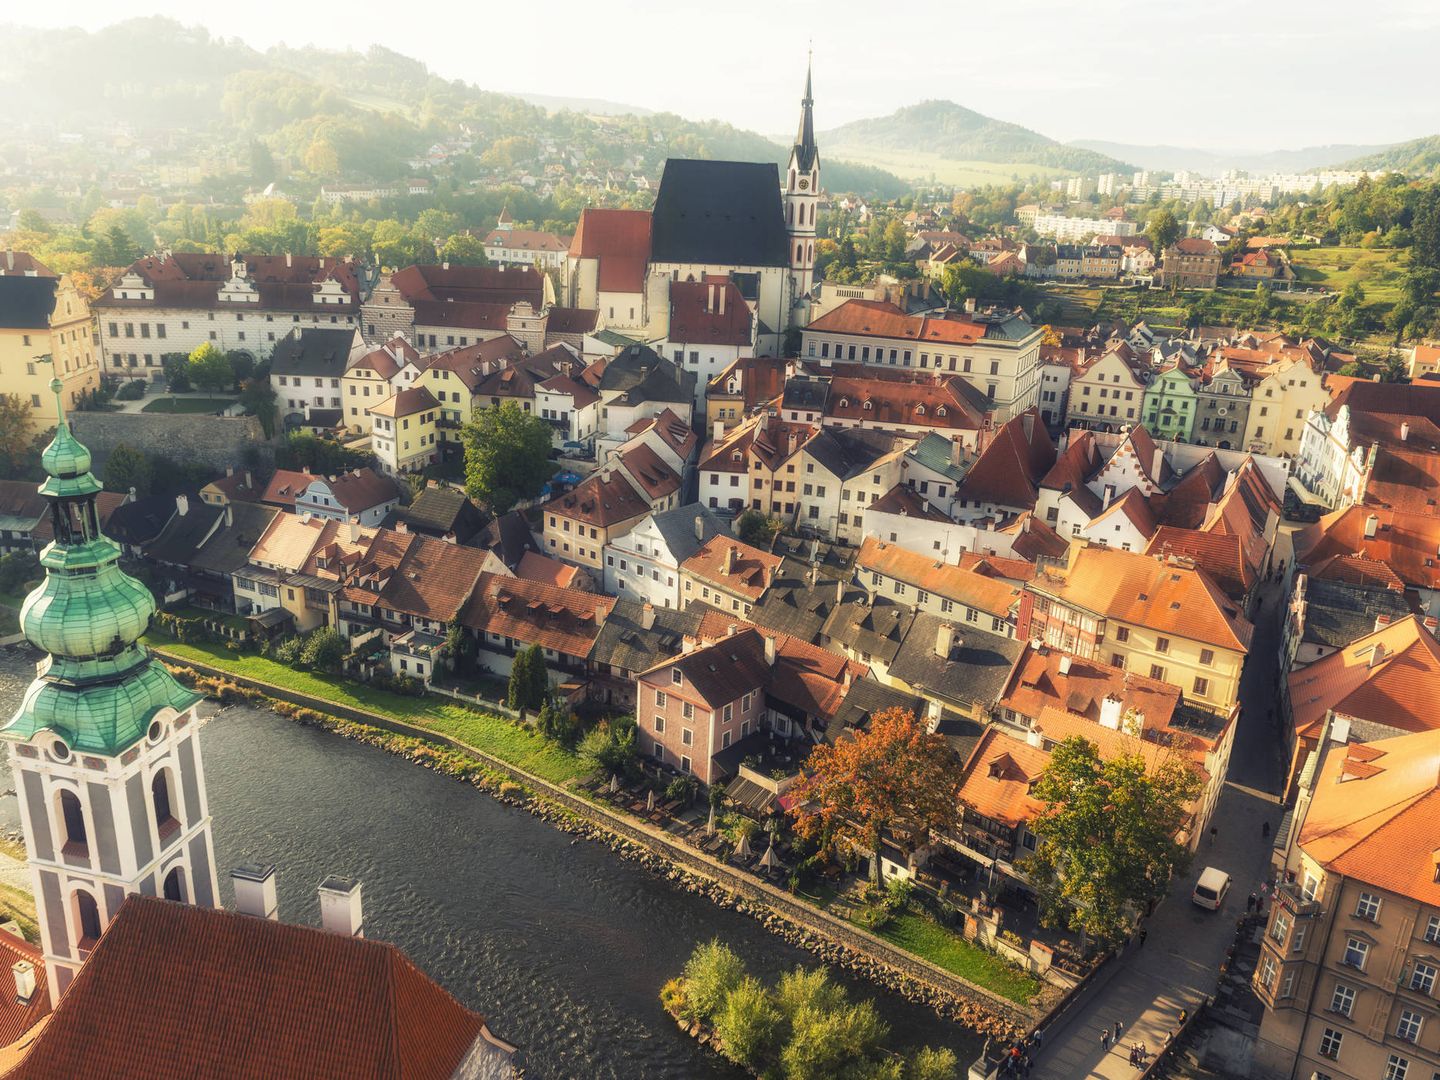 Aerial view on Historic Centre of Český Krumlov at sunrise, situated on the banks of the Vltava river. Czech Republic. UNESCO world heritage site.